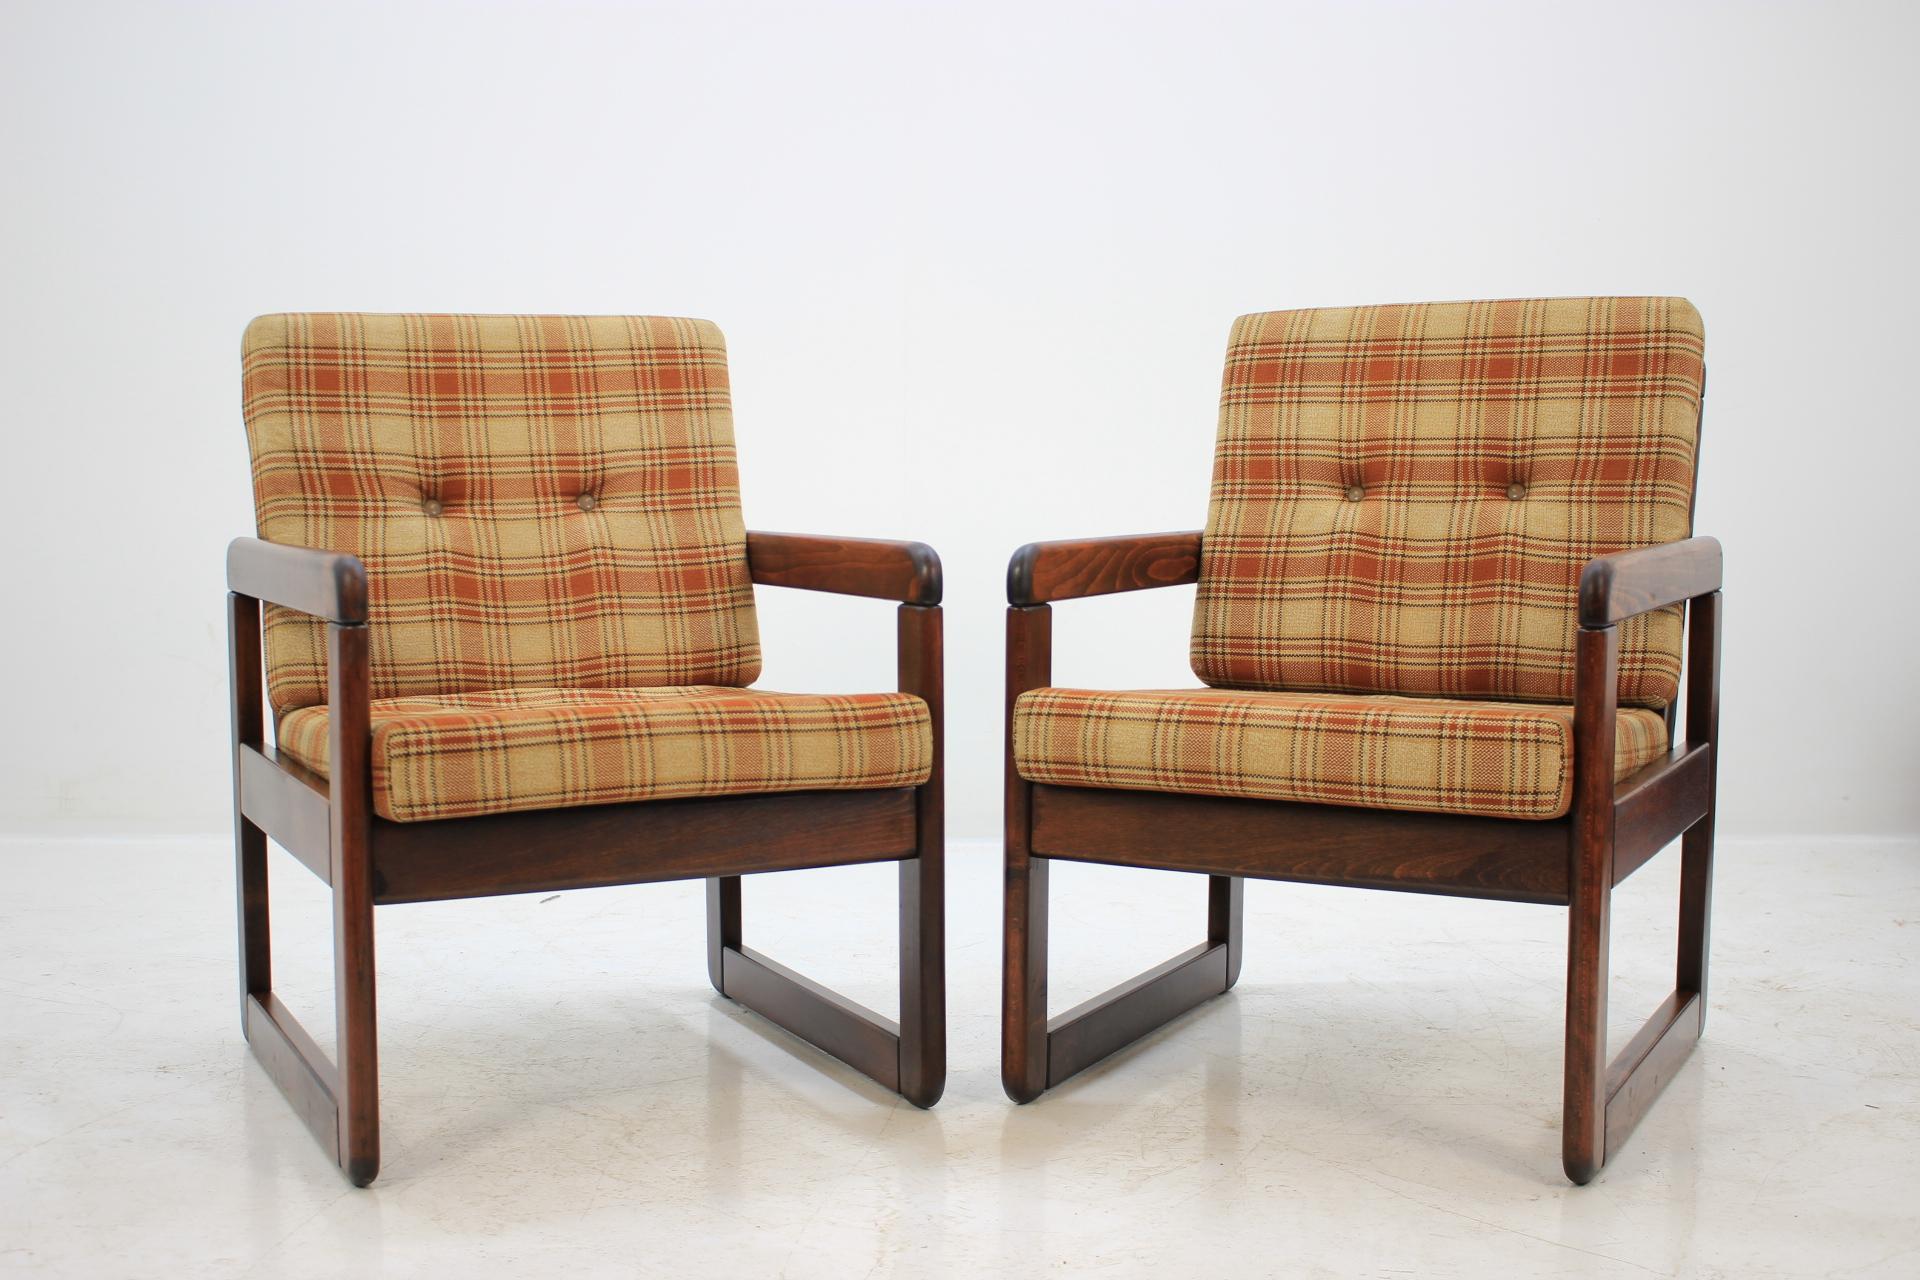 - Made of oakwood
- Quality, fixed Czechoslovakian lounge chairs
- Partially renovated
- Original upholstery
- Very good condition
- Were at the hotel in Prague.